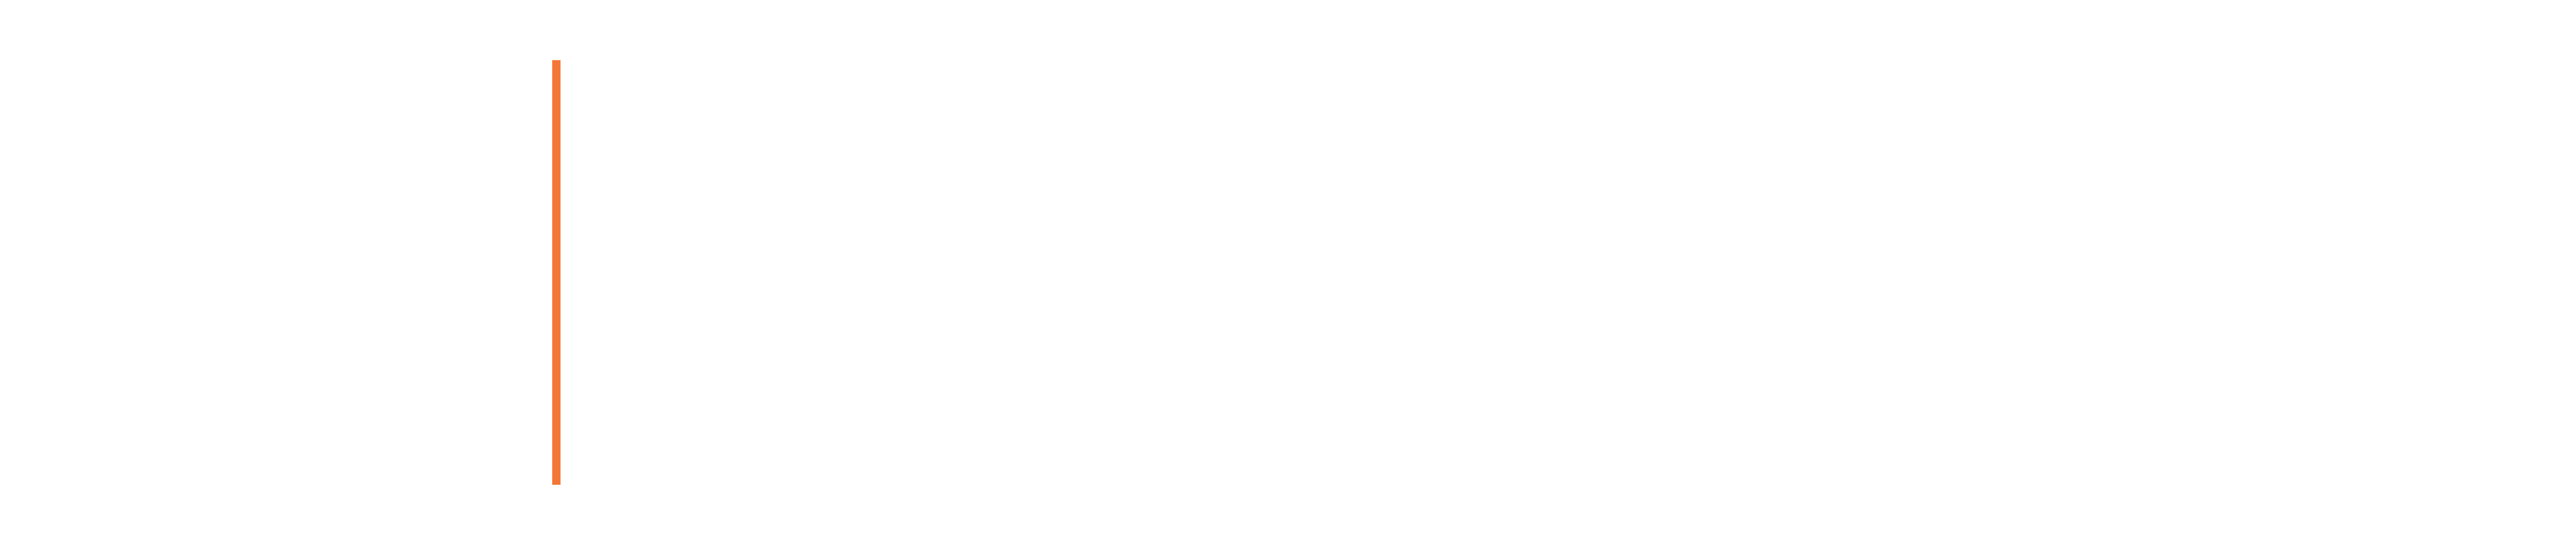 Education Policy Research Center